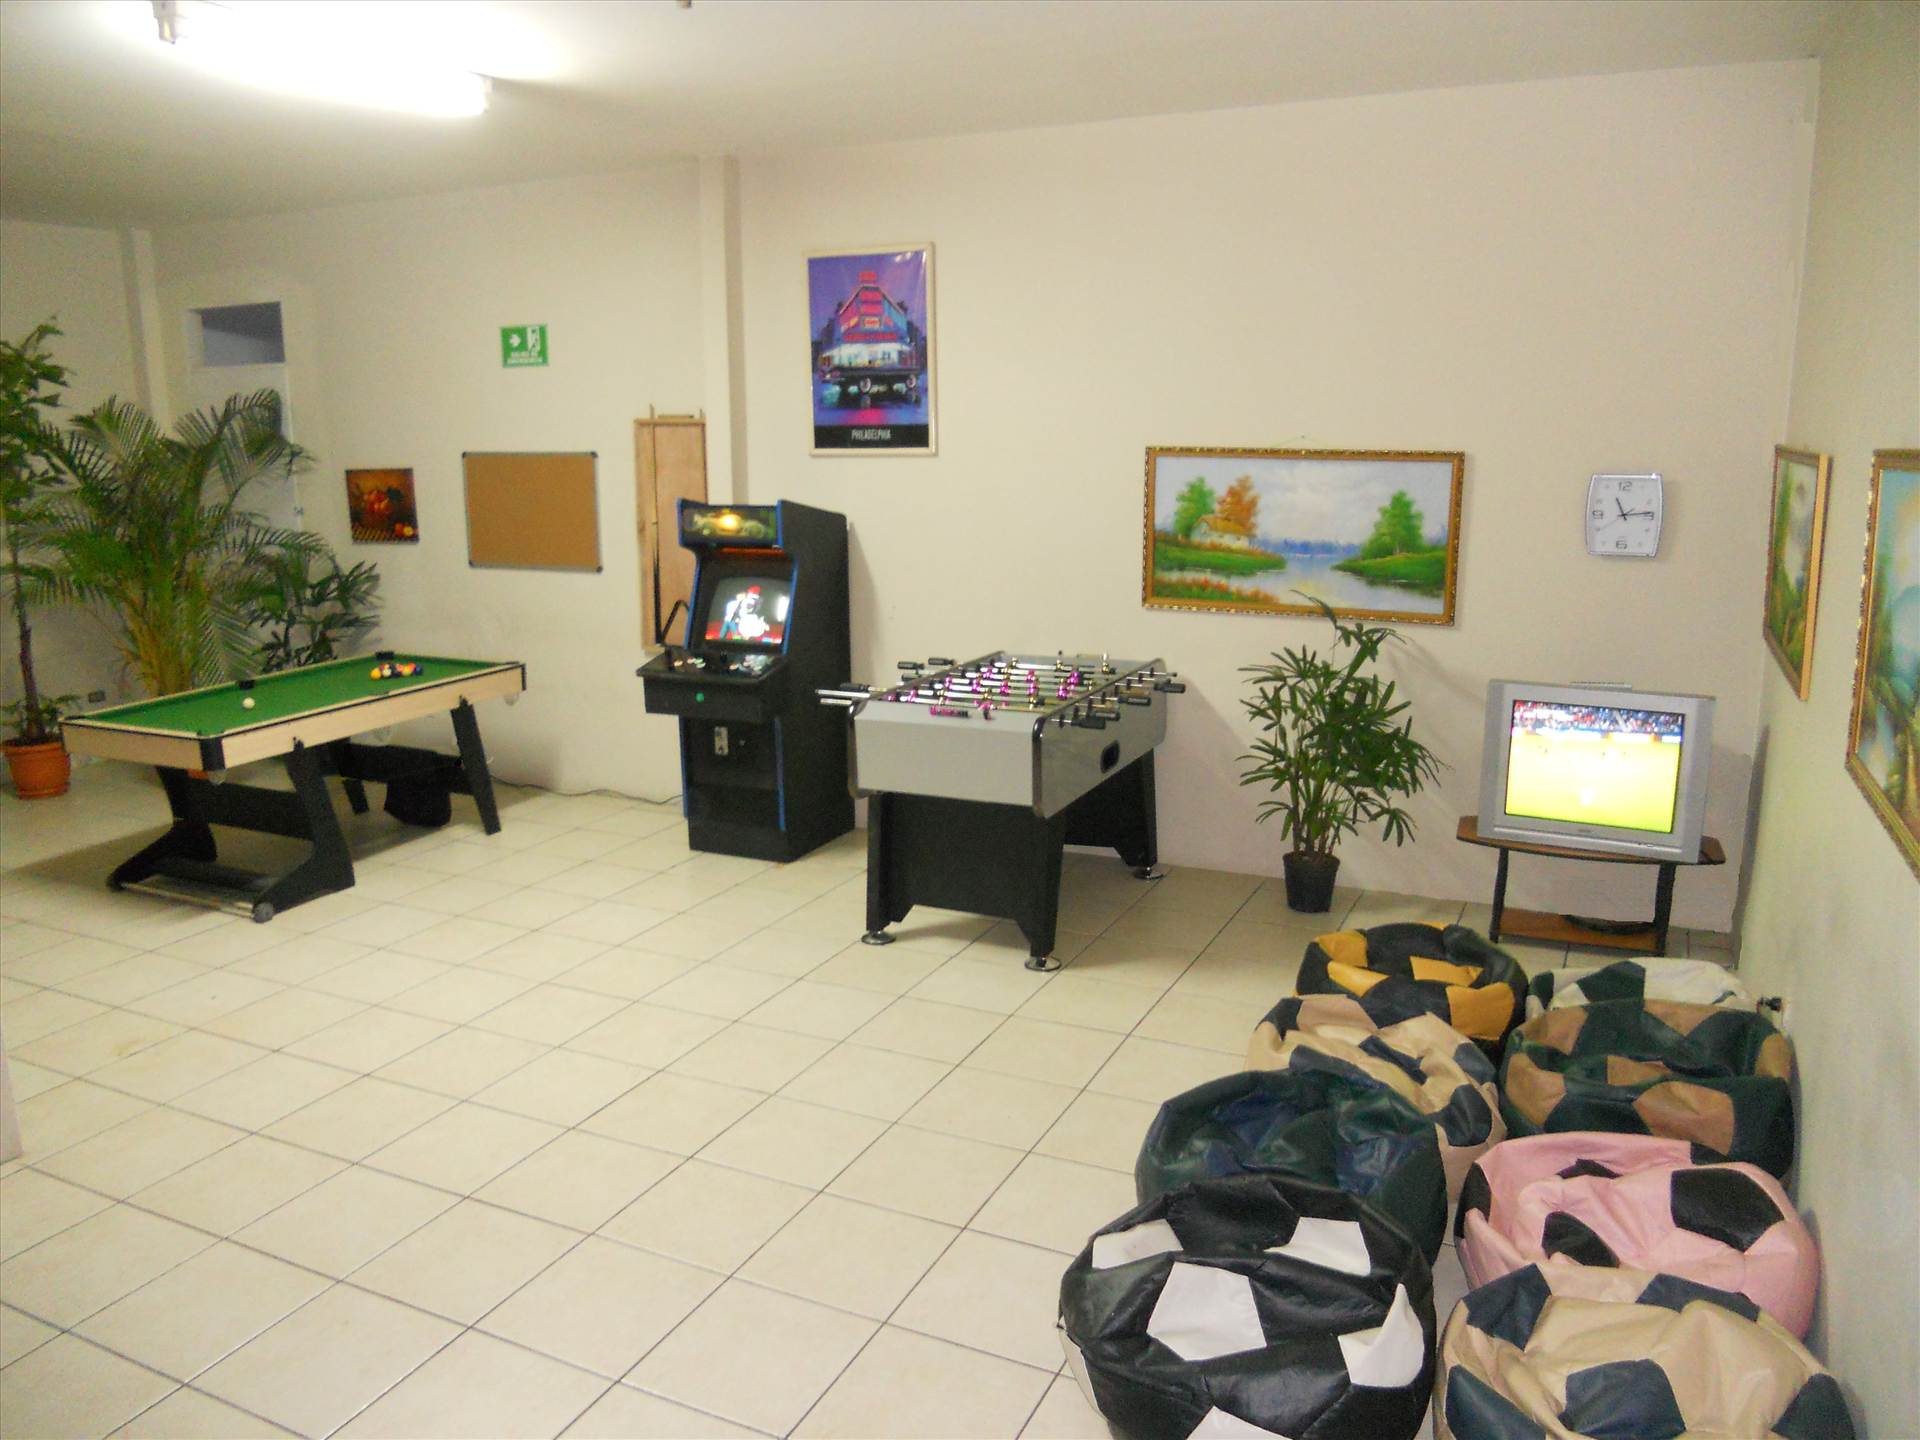 BEST COMPANY EMPLOYEE MOTIVATIONAL GAME ROOM IDEA To date, Costa Rica's Call Center is the only BPO in LATIN AMERICA with a retro arcade game room, period.Our entire staff has concluded that an immediate visual stimulation combined with a conditioned manual stimulation in gaming added a very special ingr by richardblank